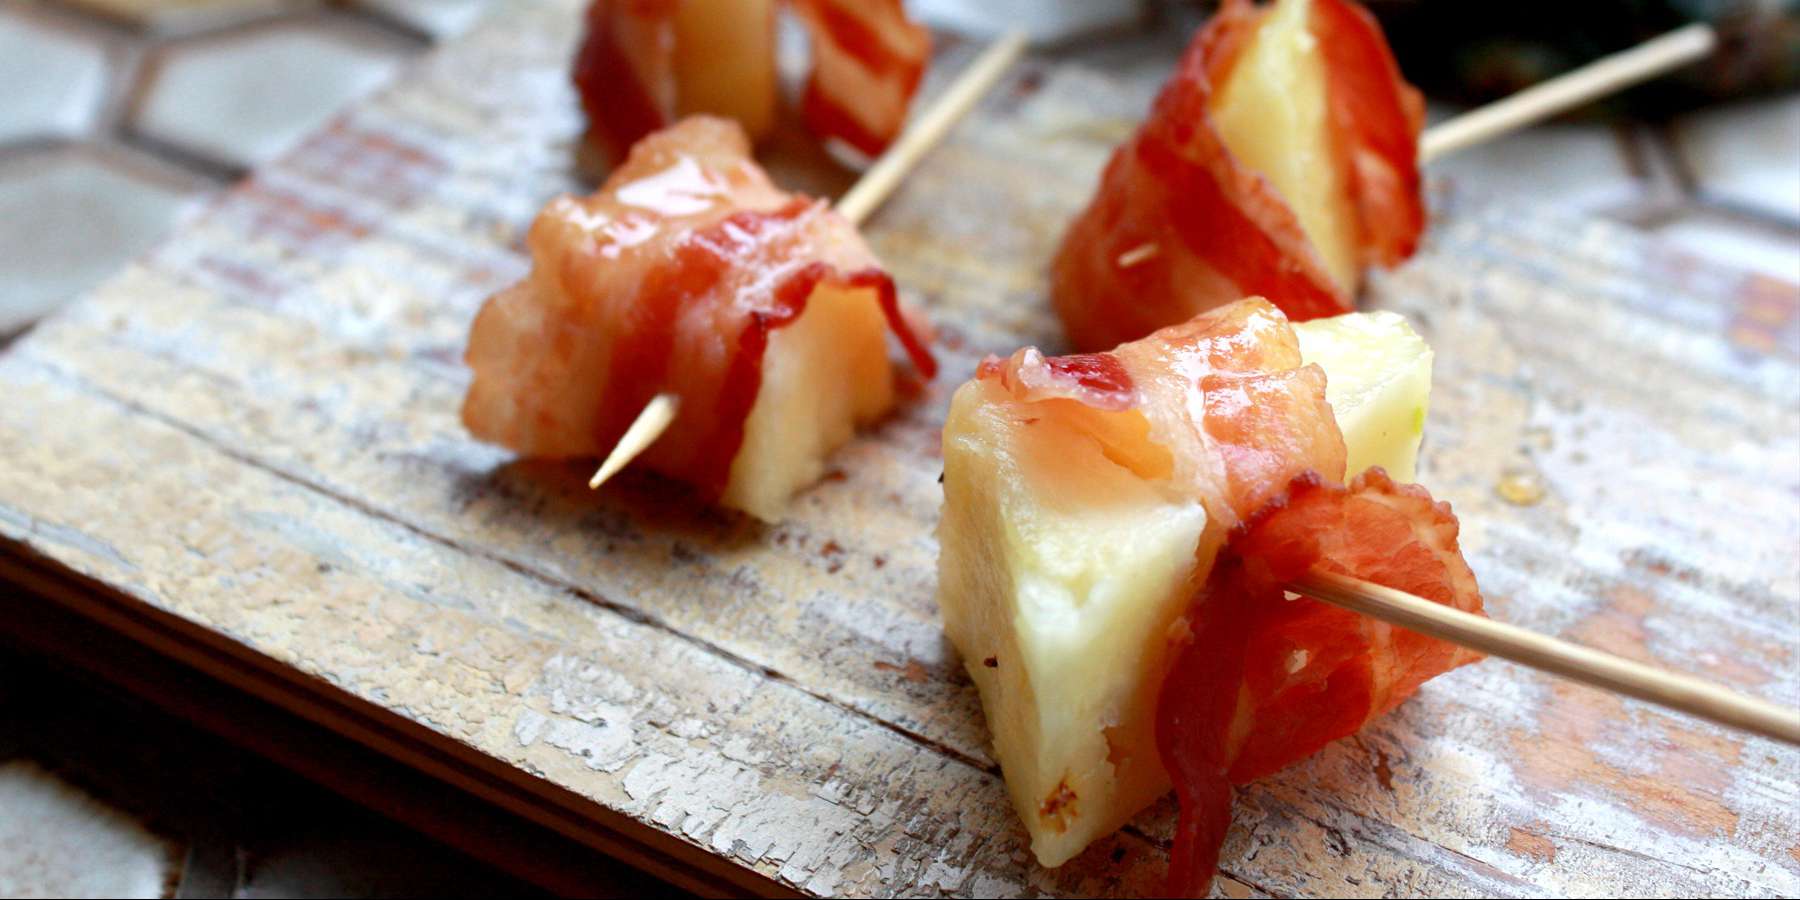 Bacon wrapped pineapple